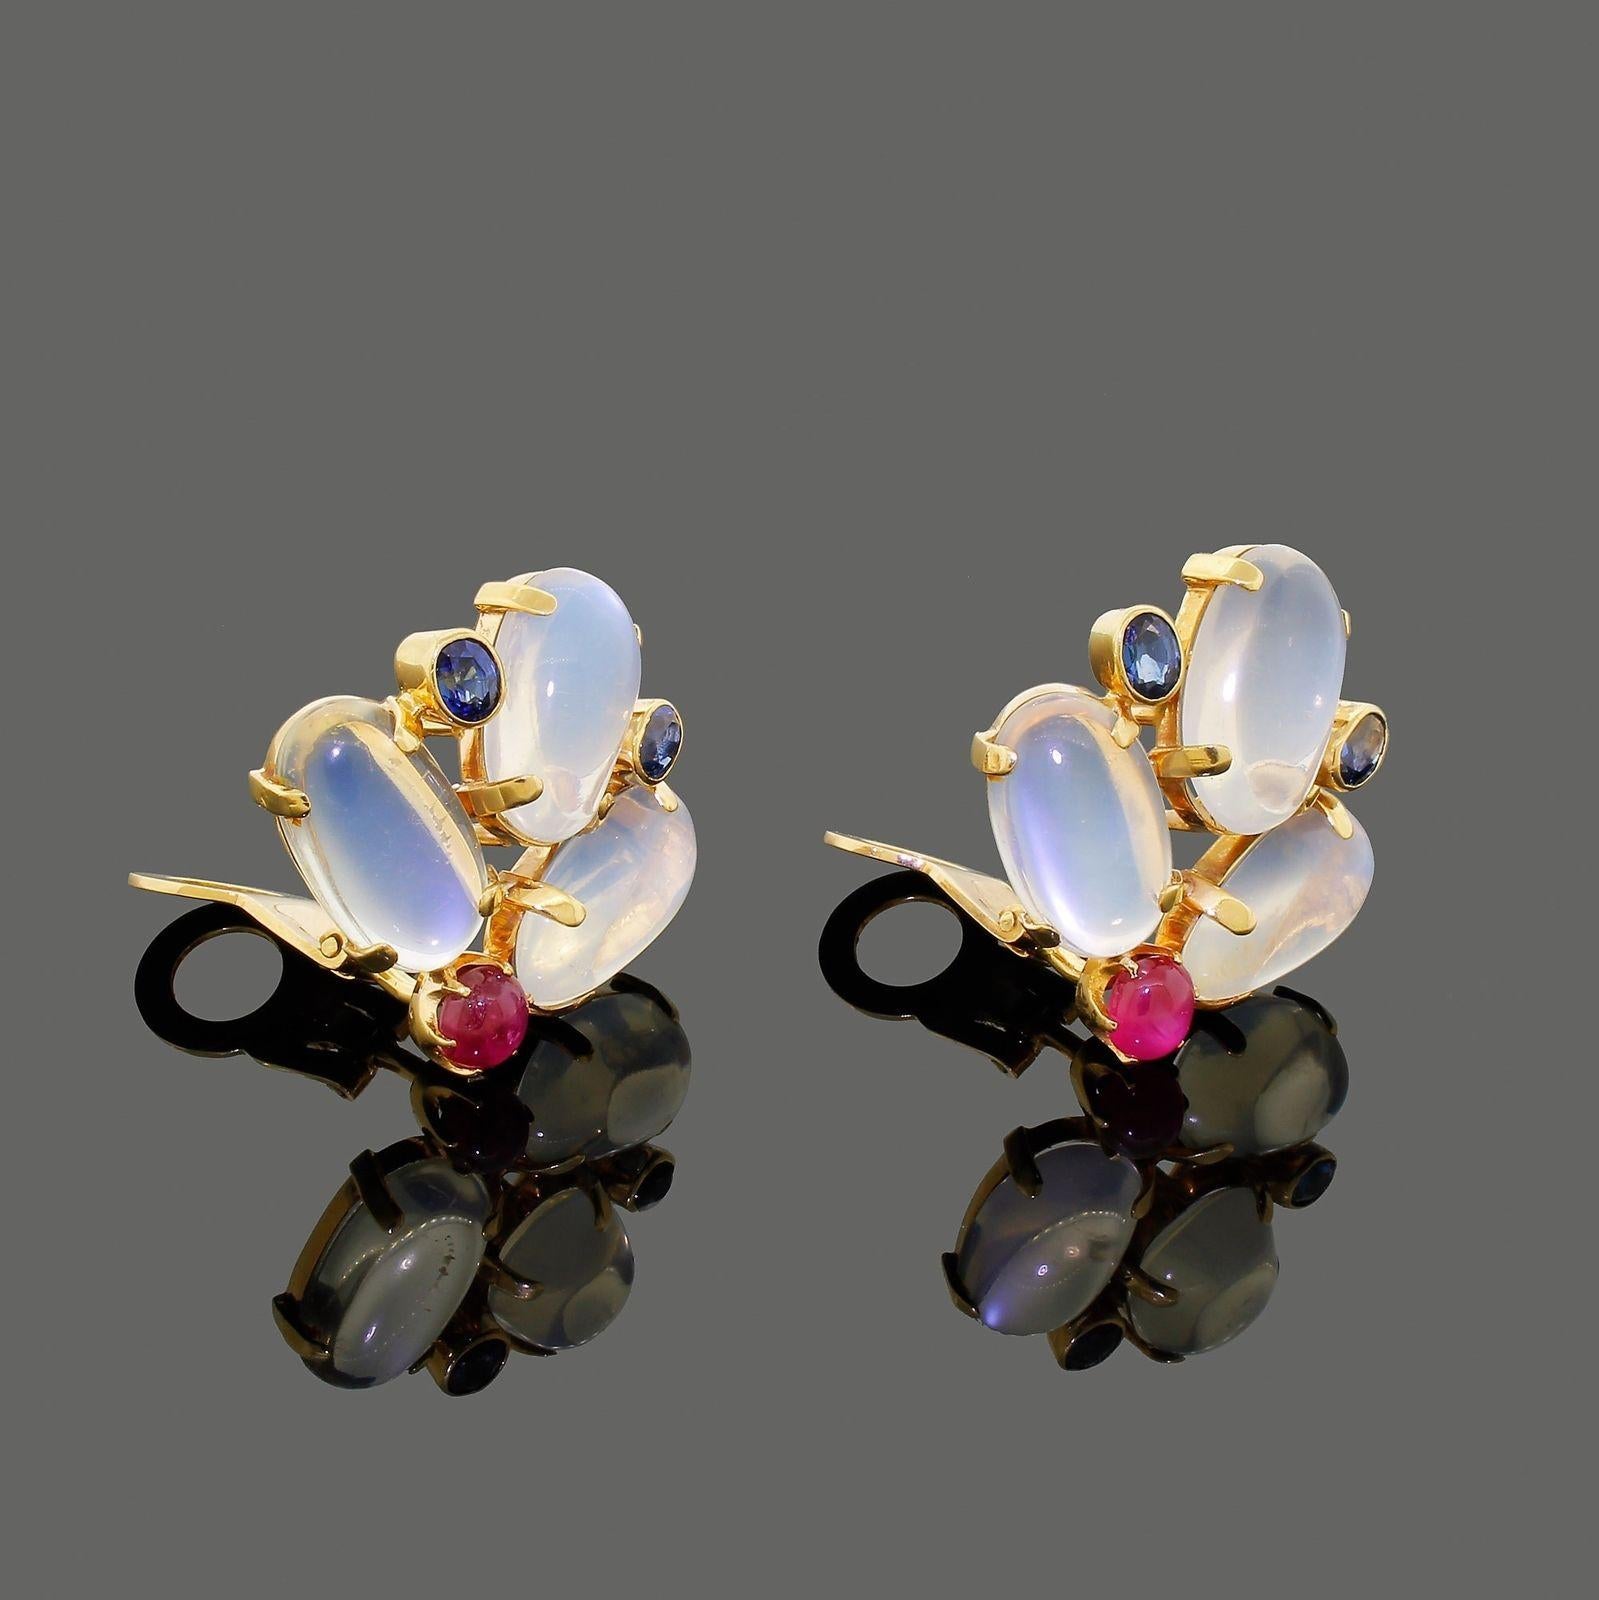 Magnificent pair of very well made , very classy vintage Moonstone earrings.
From the moment you see them in person you can tell they are very special - if you did not know any better you would say they were Tiffany & Co from the 1940's -